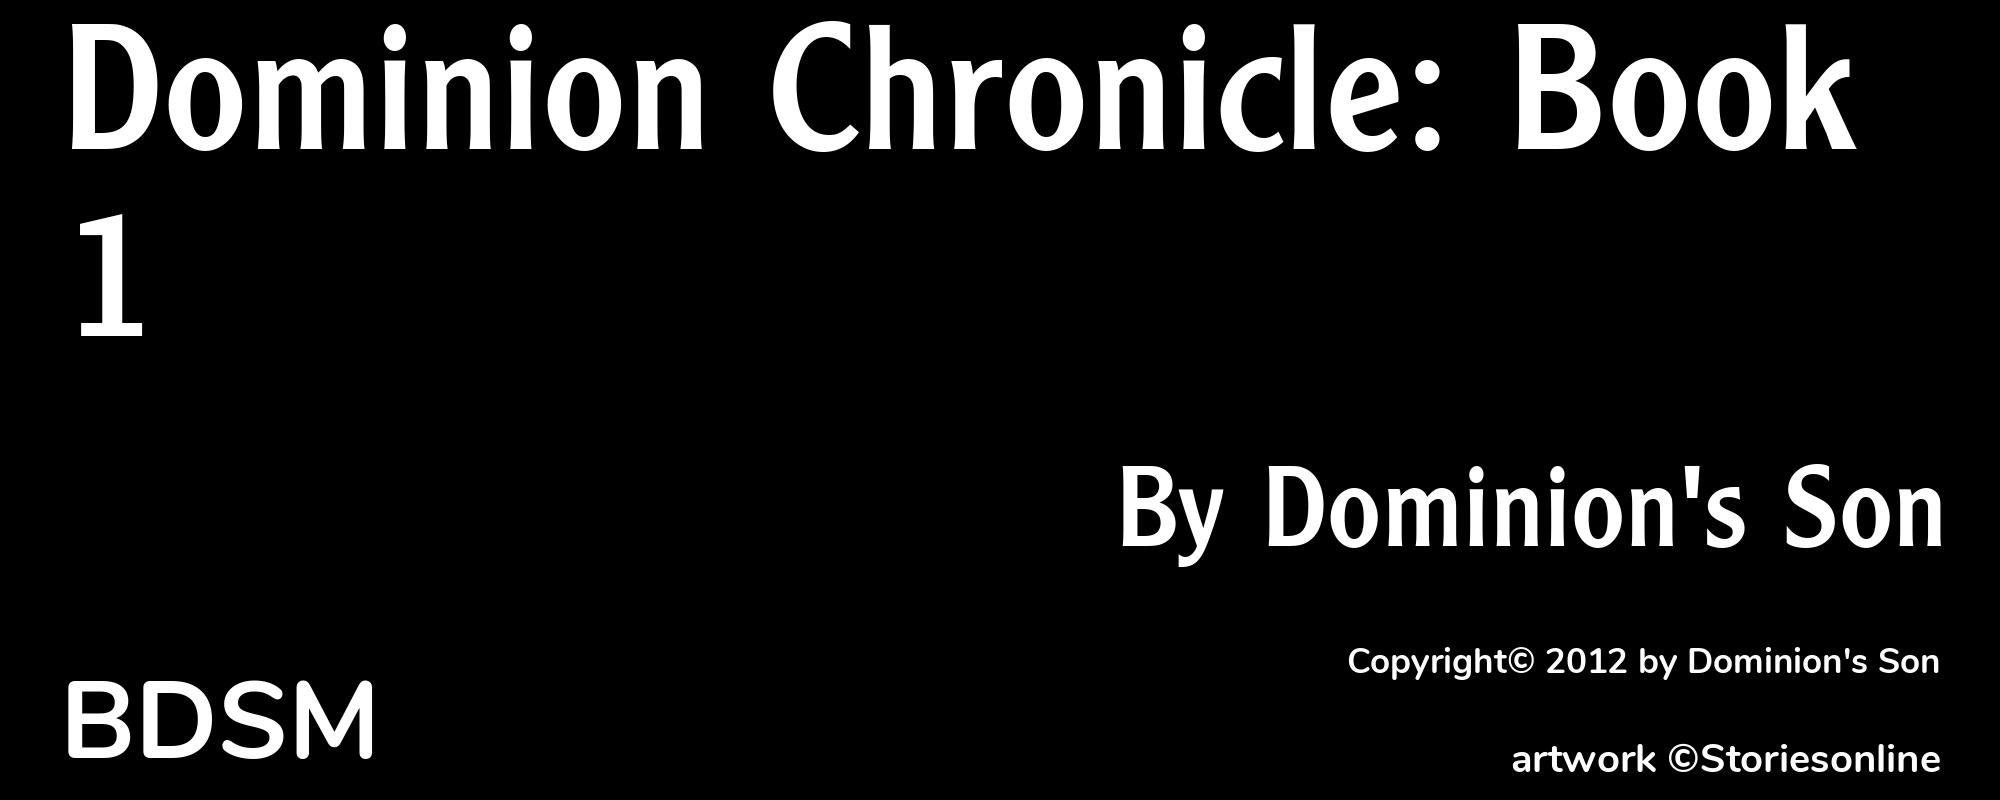 Dominion Chronicle: Book 1 - Cover